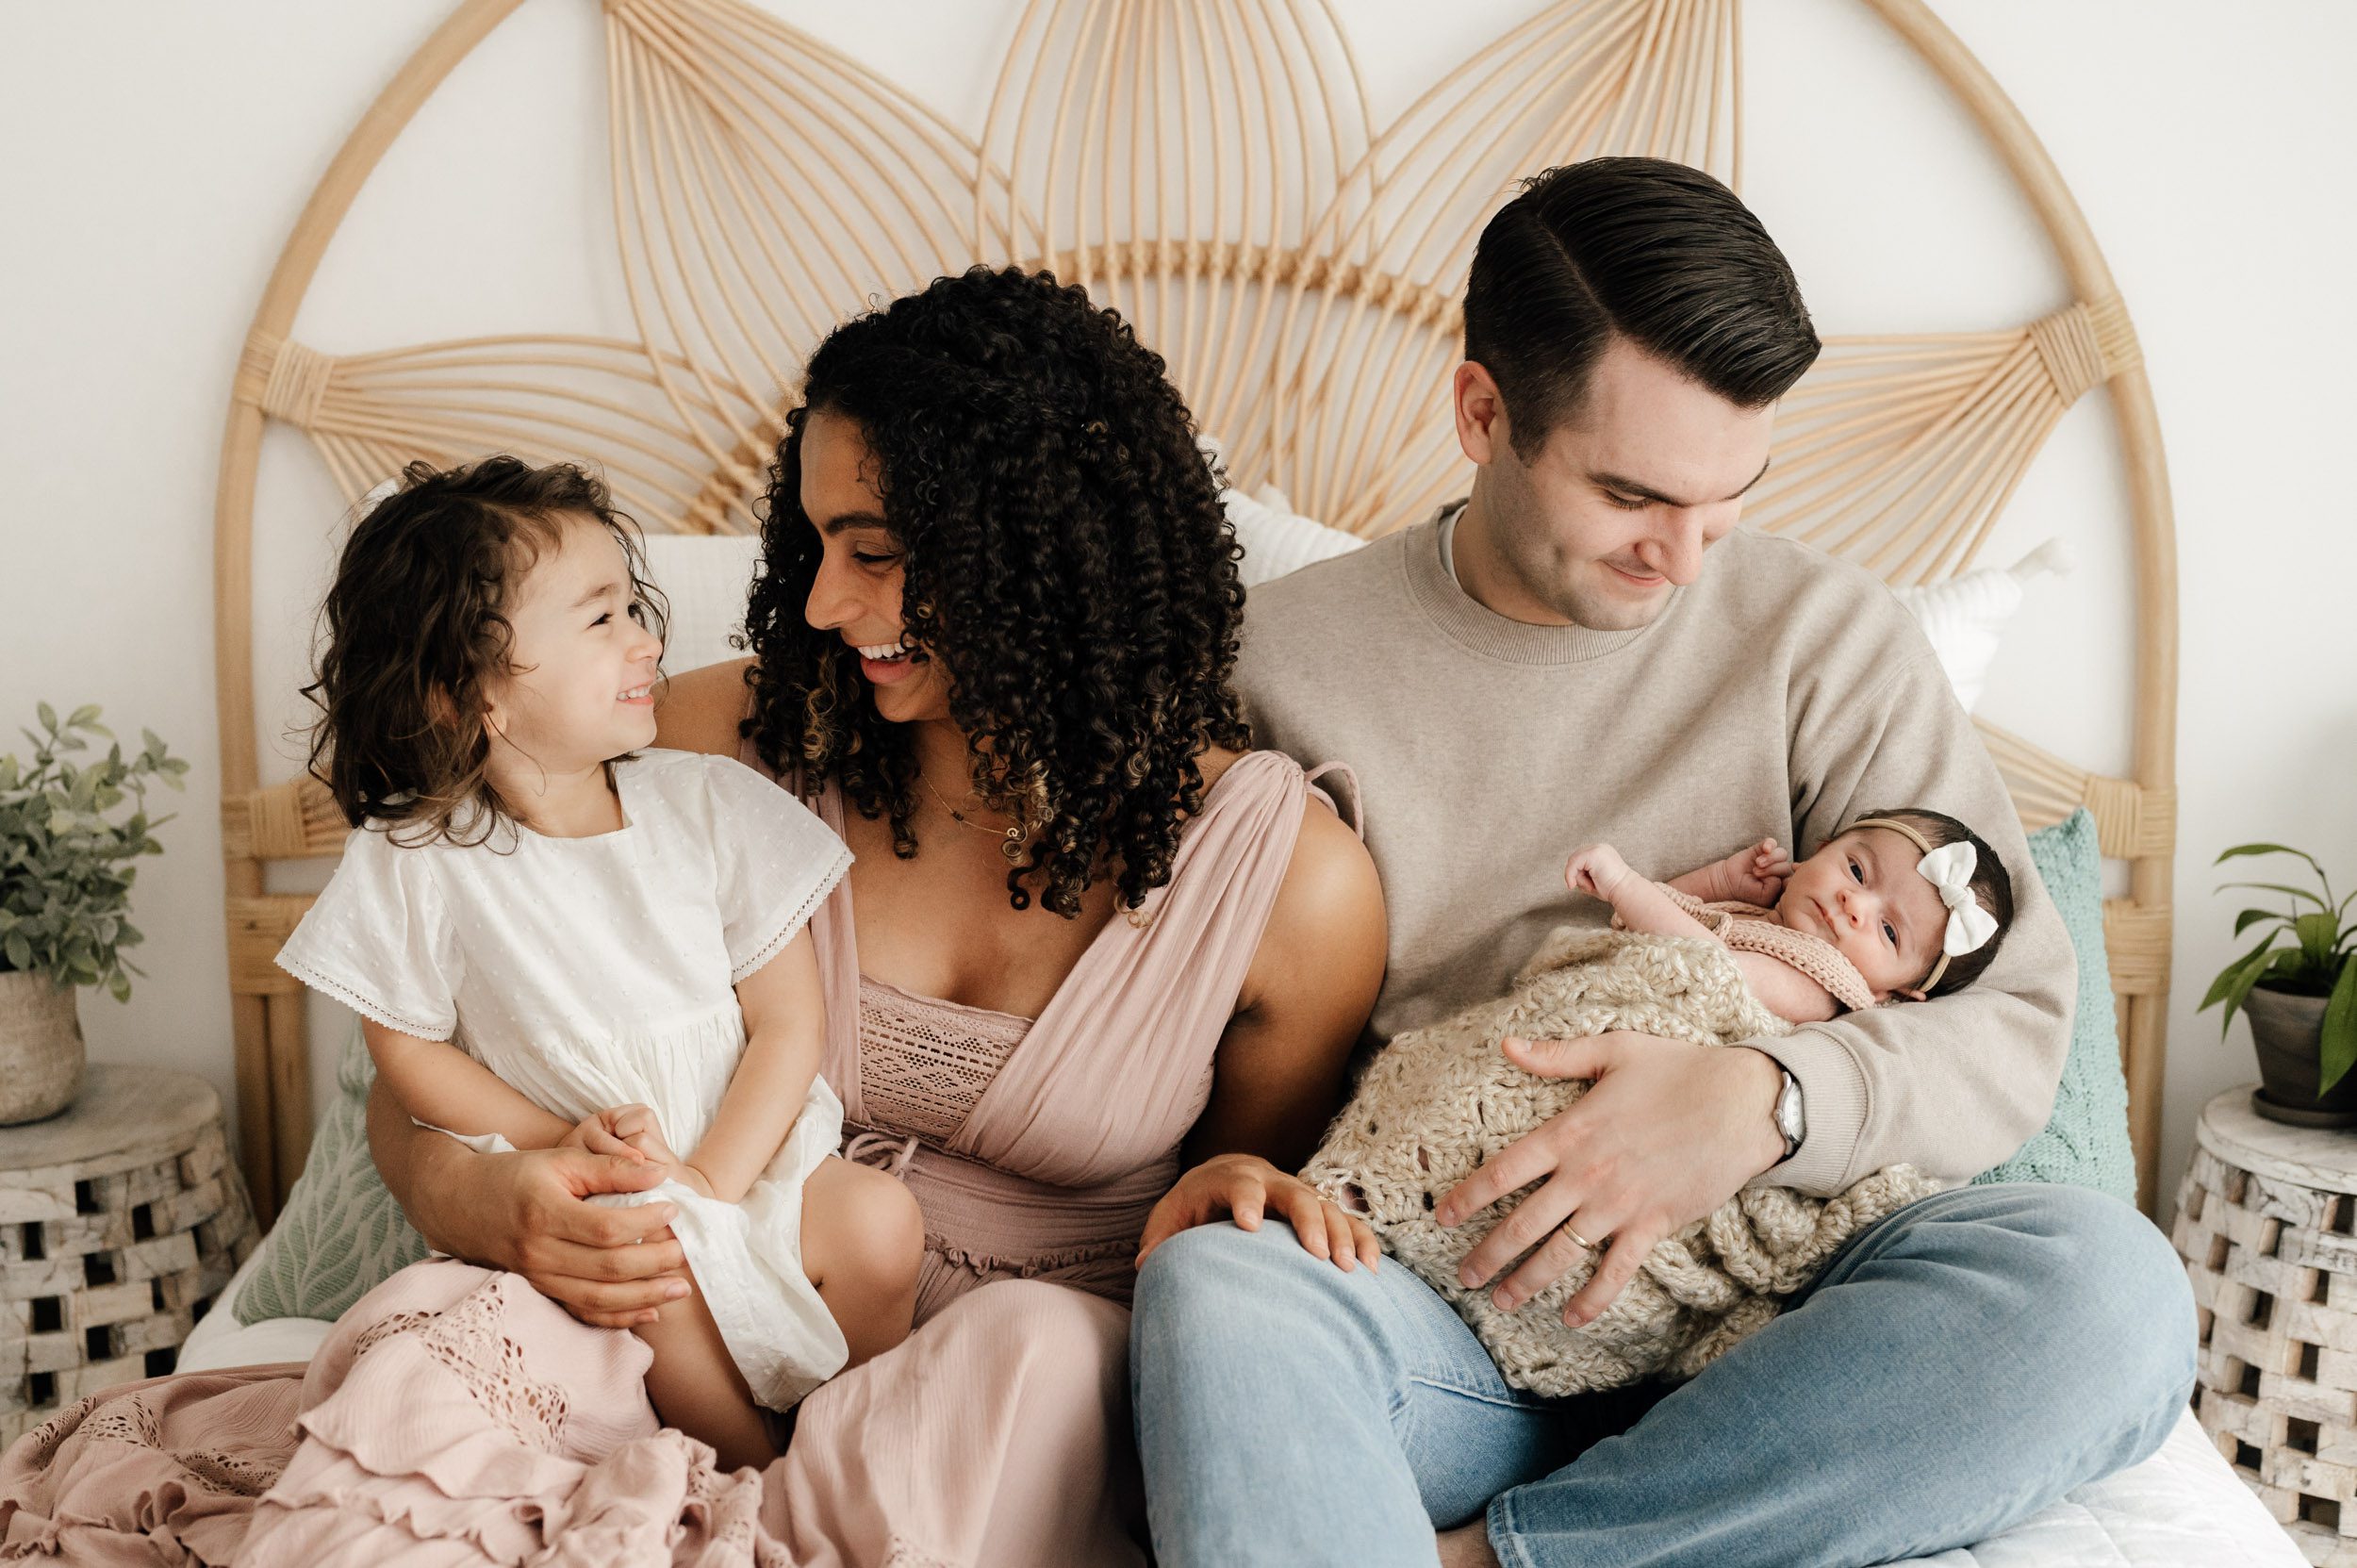 parents sitting on a bed holding their newborn baby girl and older daughter on their lap and smiling at them during a natural light newborn photoshoot